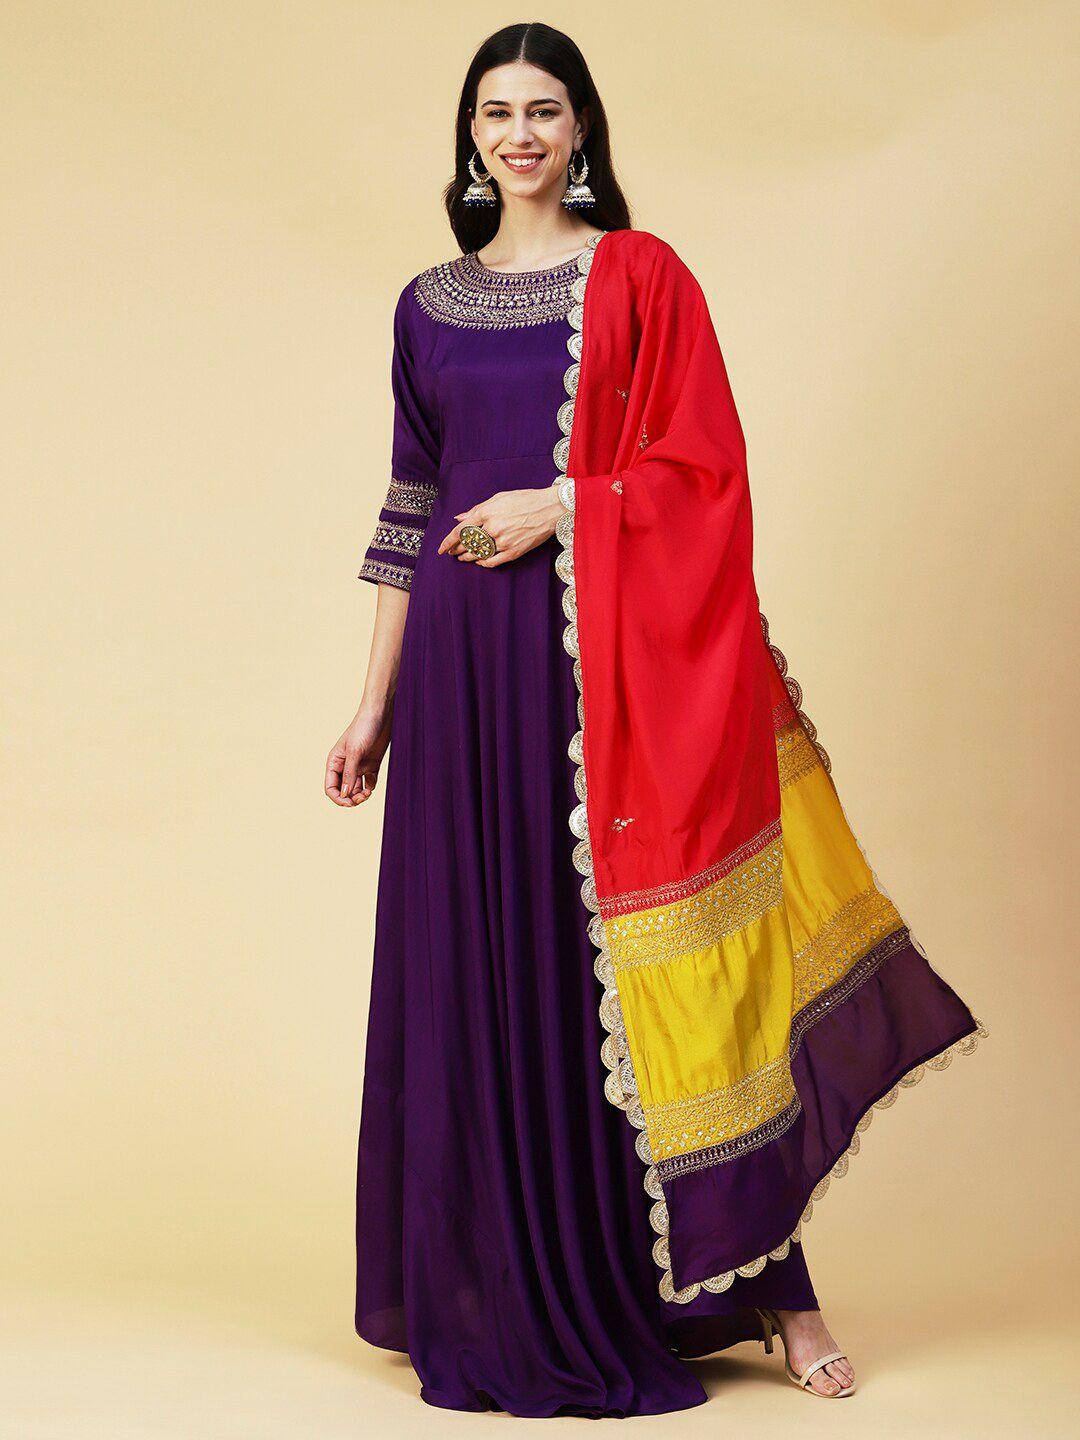 envy me by fashor embellished maxi dress with dupatta